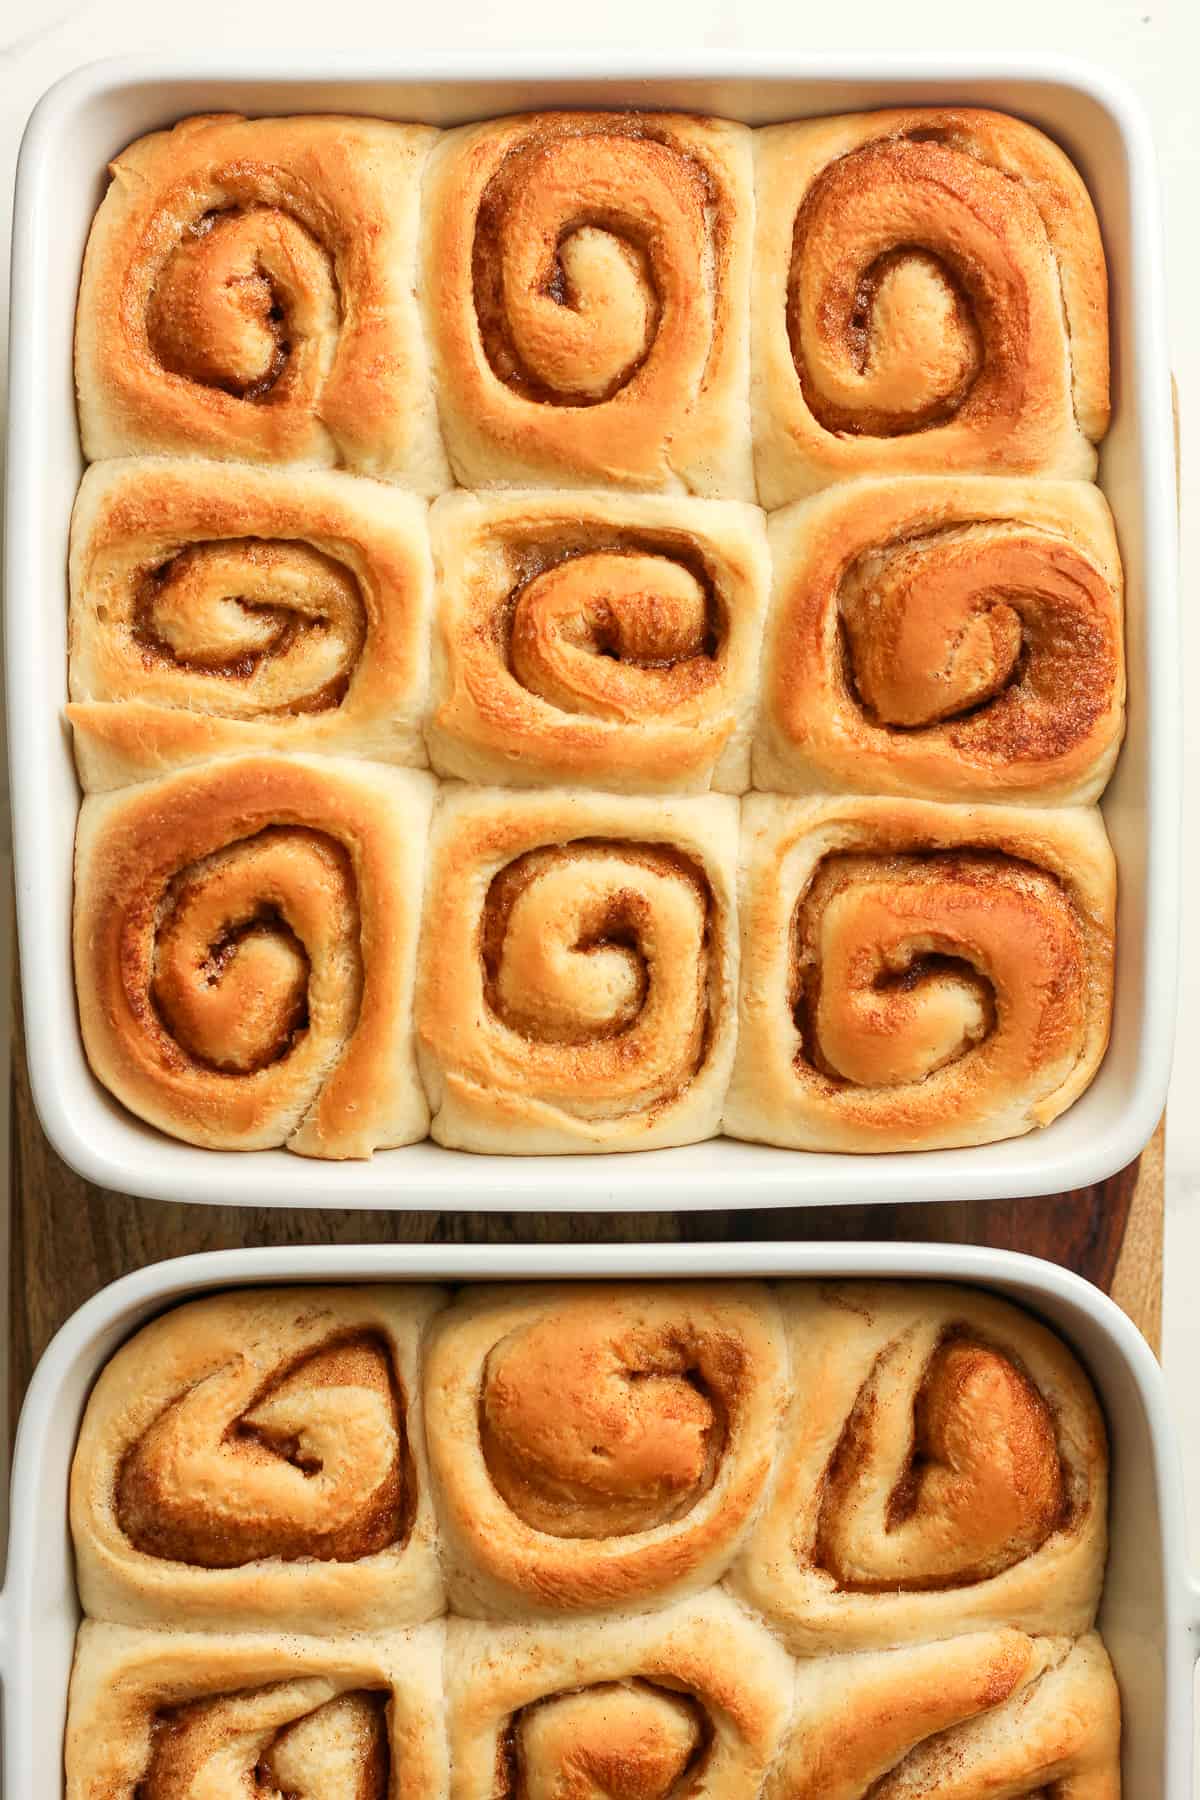 Two dishes of cinnamon rolls.